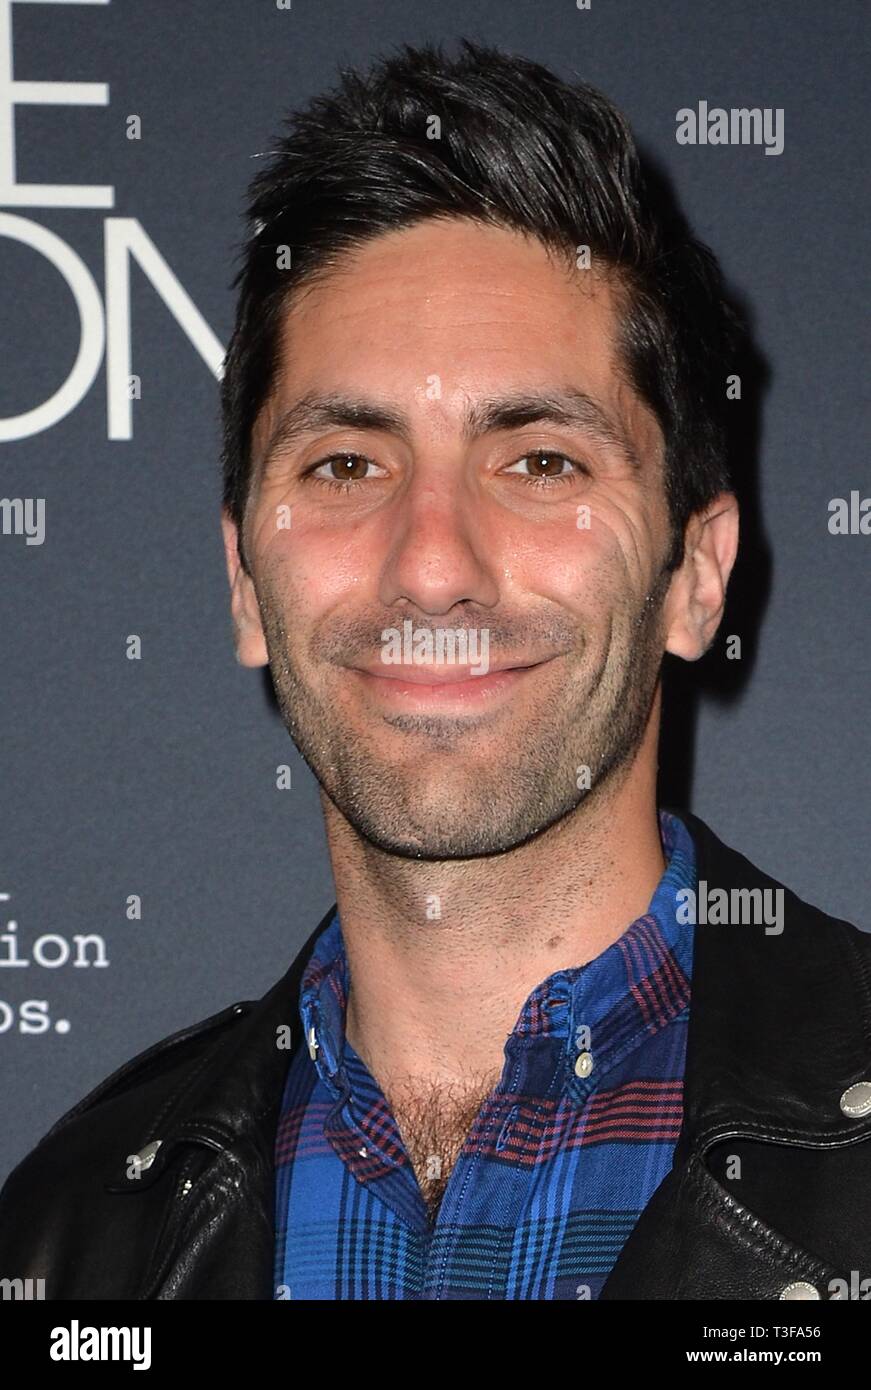 New York, NY, USA. 8th Apr, 2019. Nev Schulman at arrivals for FOSSE/VERDON Premiere, Gerald Schoenfeld Theatre, New York, NY April 8, 2019. Credit: Kristin Callahan/Everett Collection/Alamy Live News Stock Photo